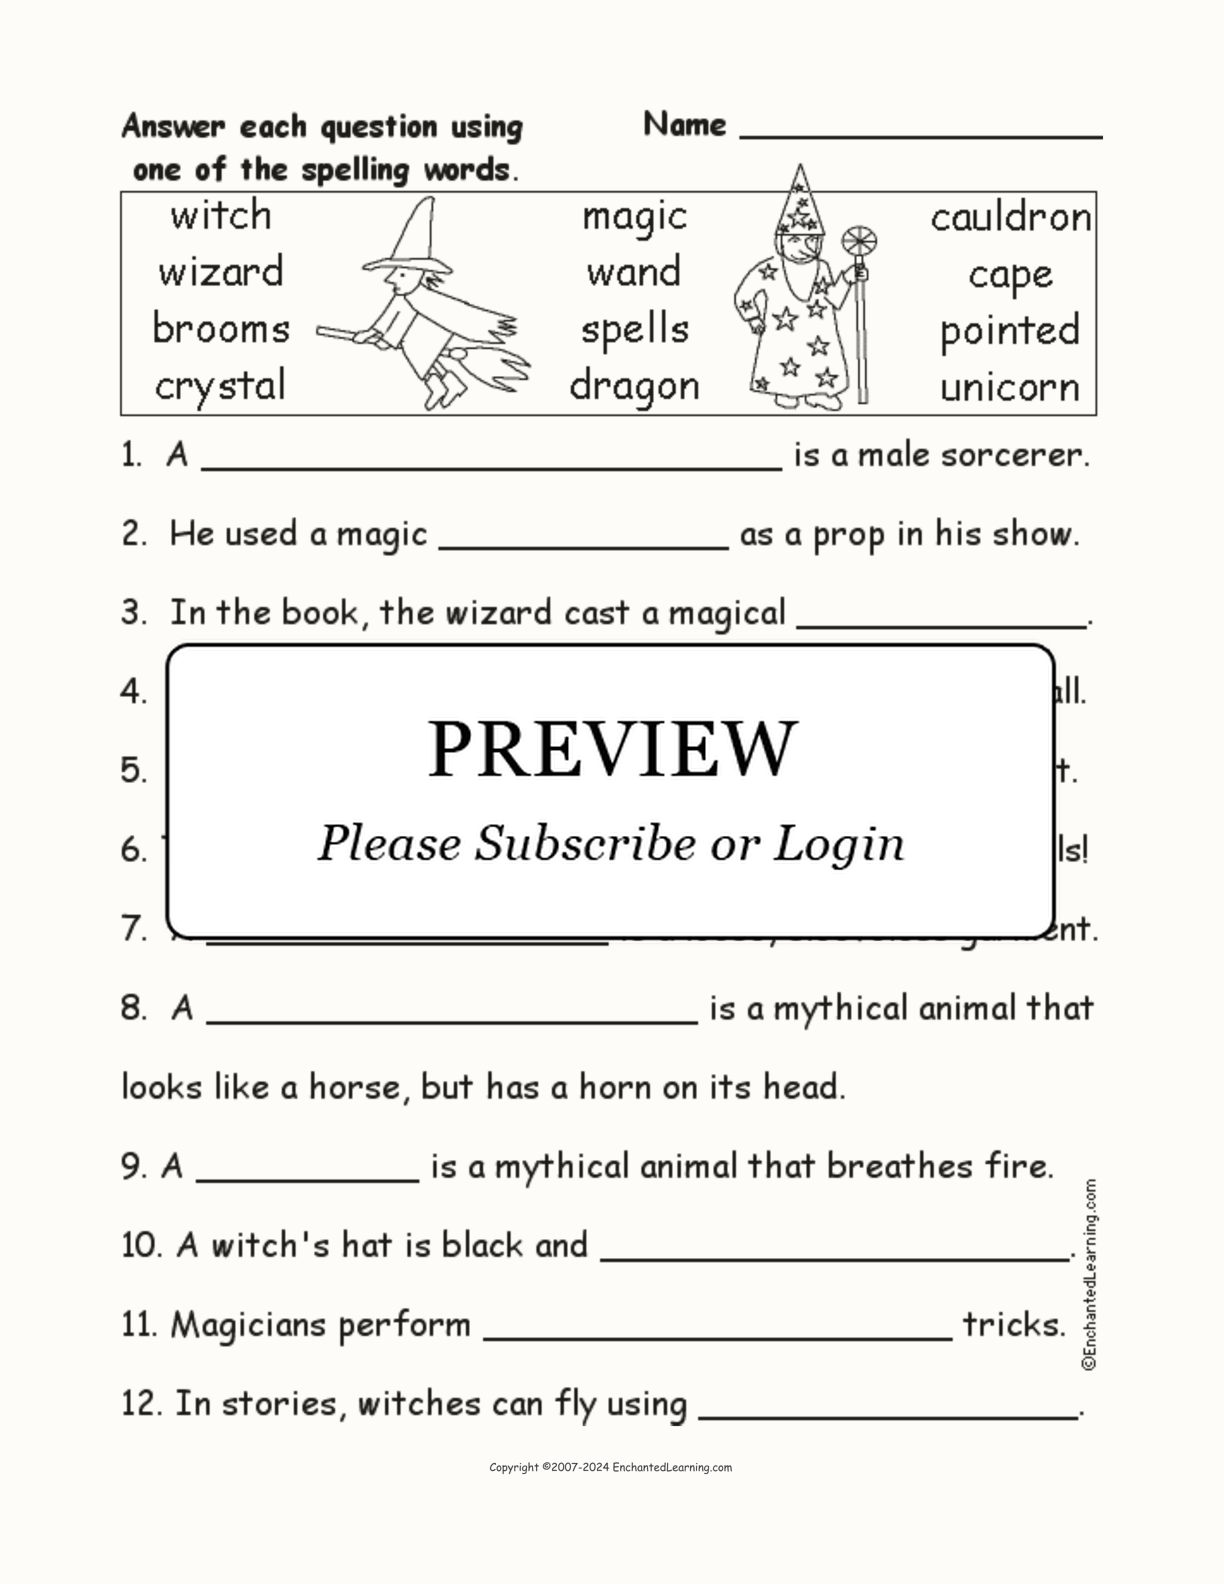 Witch Spelling Word Questions interactive worksheet page 1